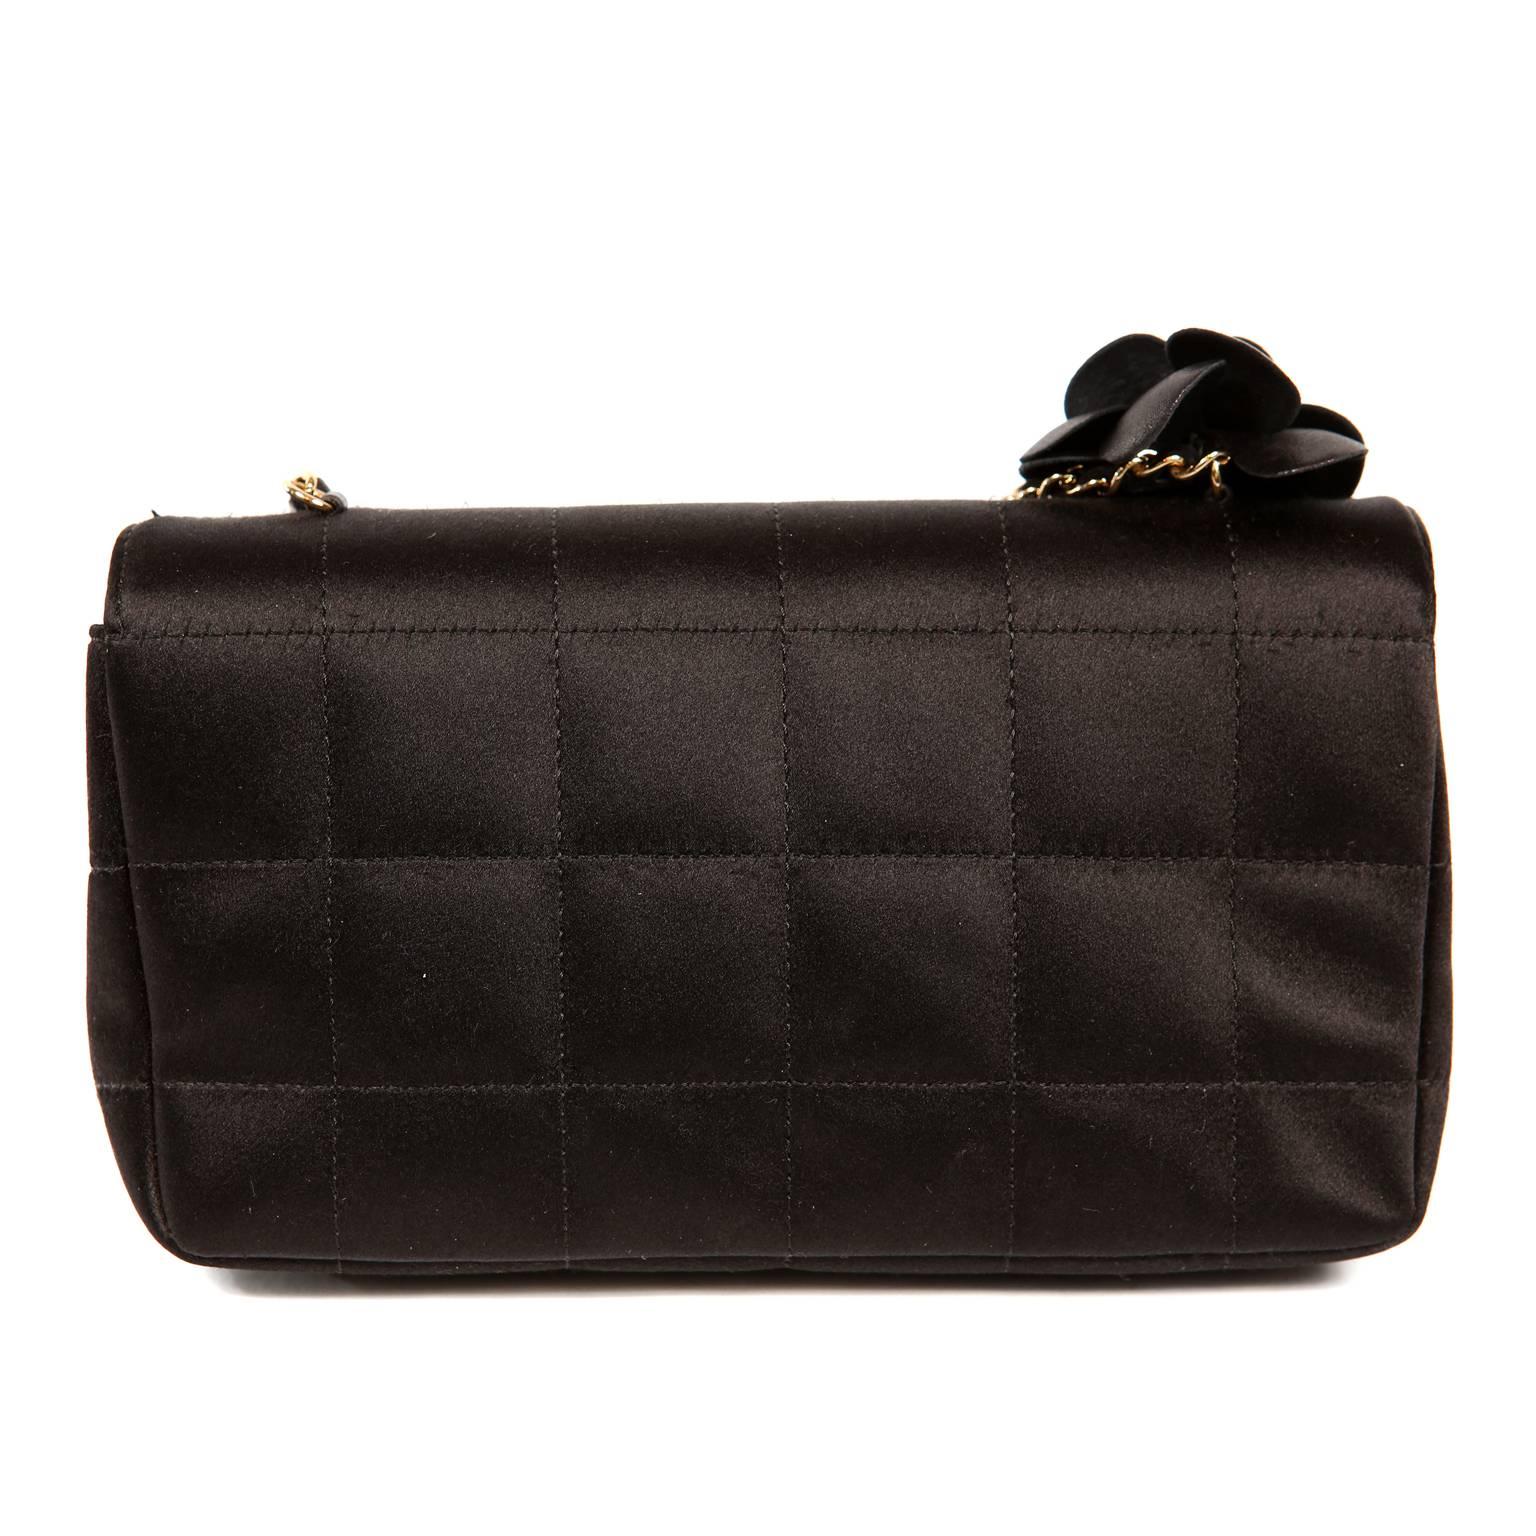 Chanel Black Satin Camellia Crossbody Bag- Pristine Condition
 Elegant and timeless, this chic evening bag is smart addition to any collection. 
Small black satin flap bag is quilted in square pattern.  Black fabric camellia flower sits atop the